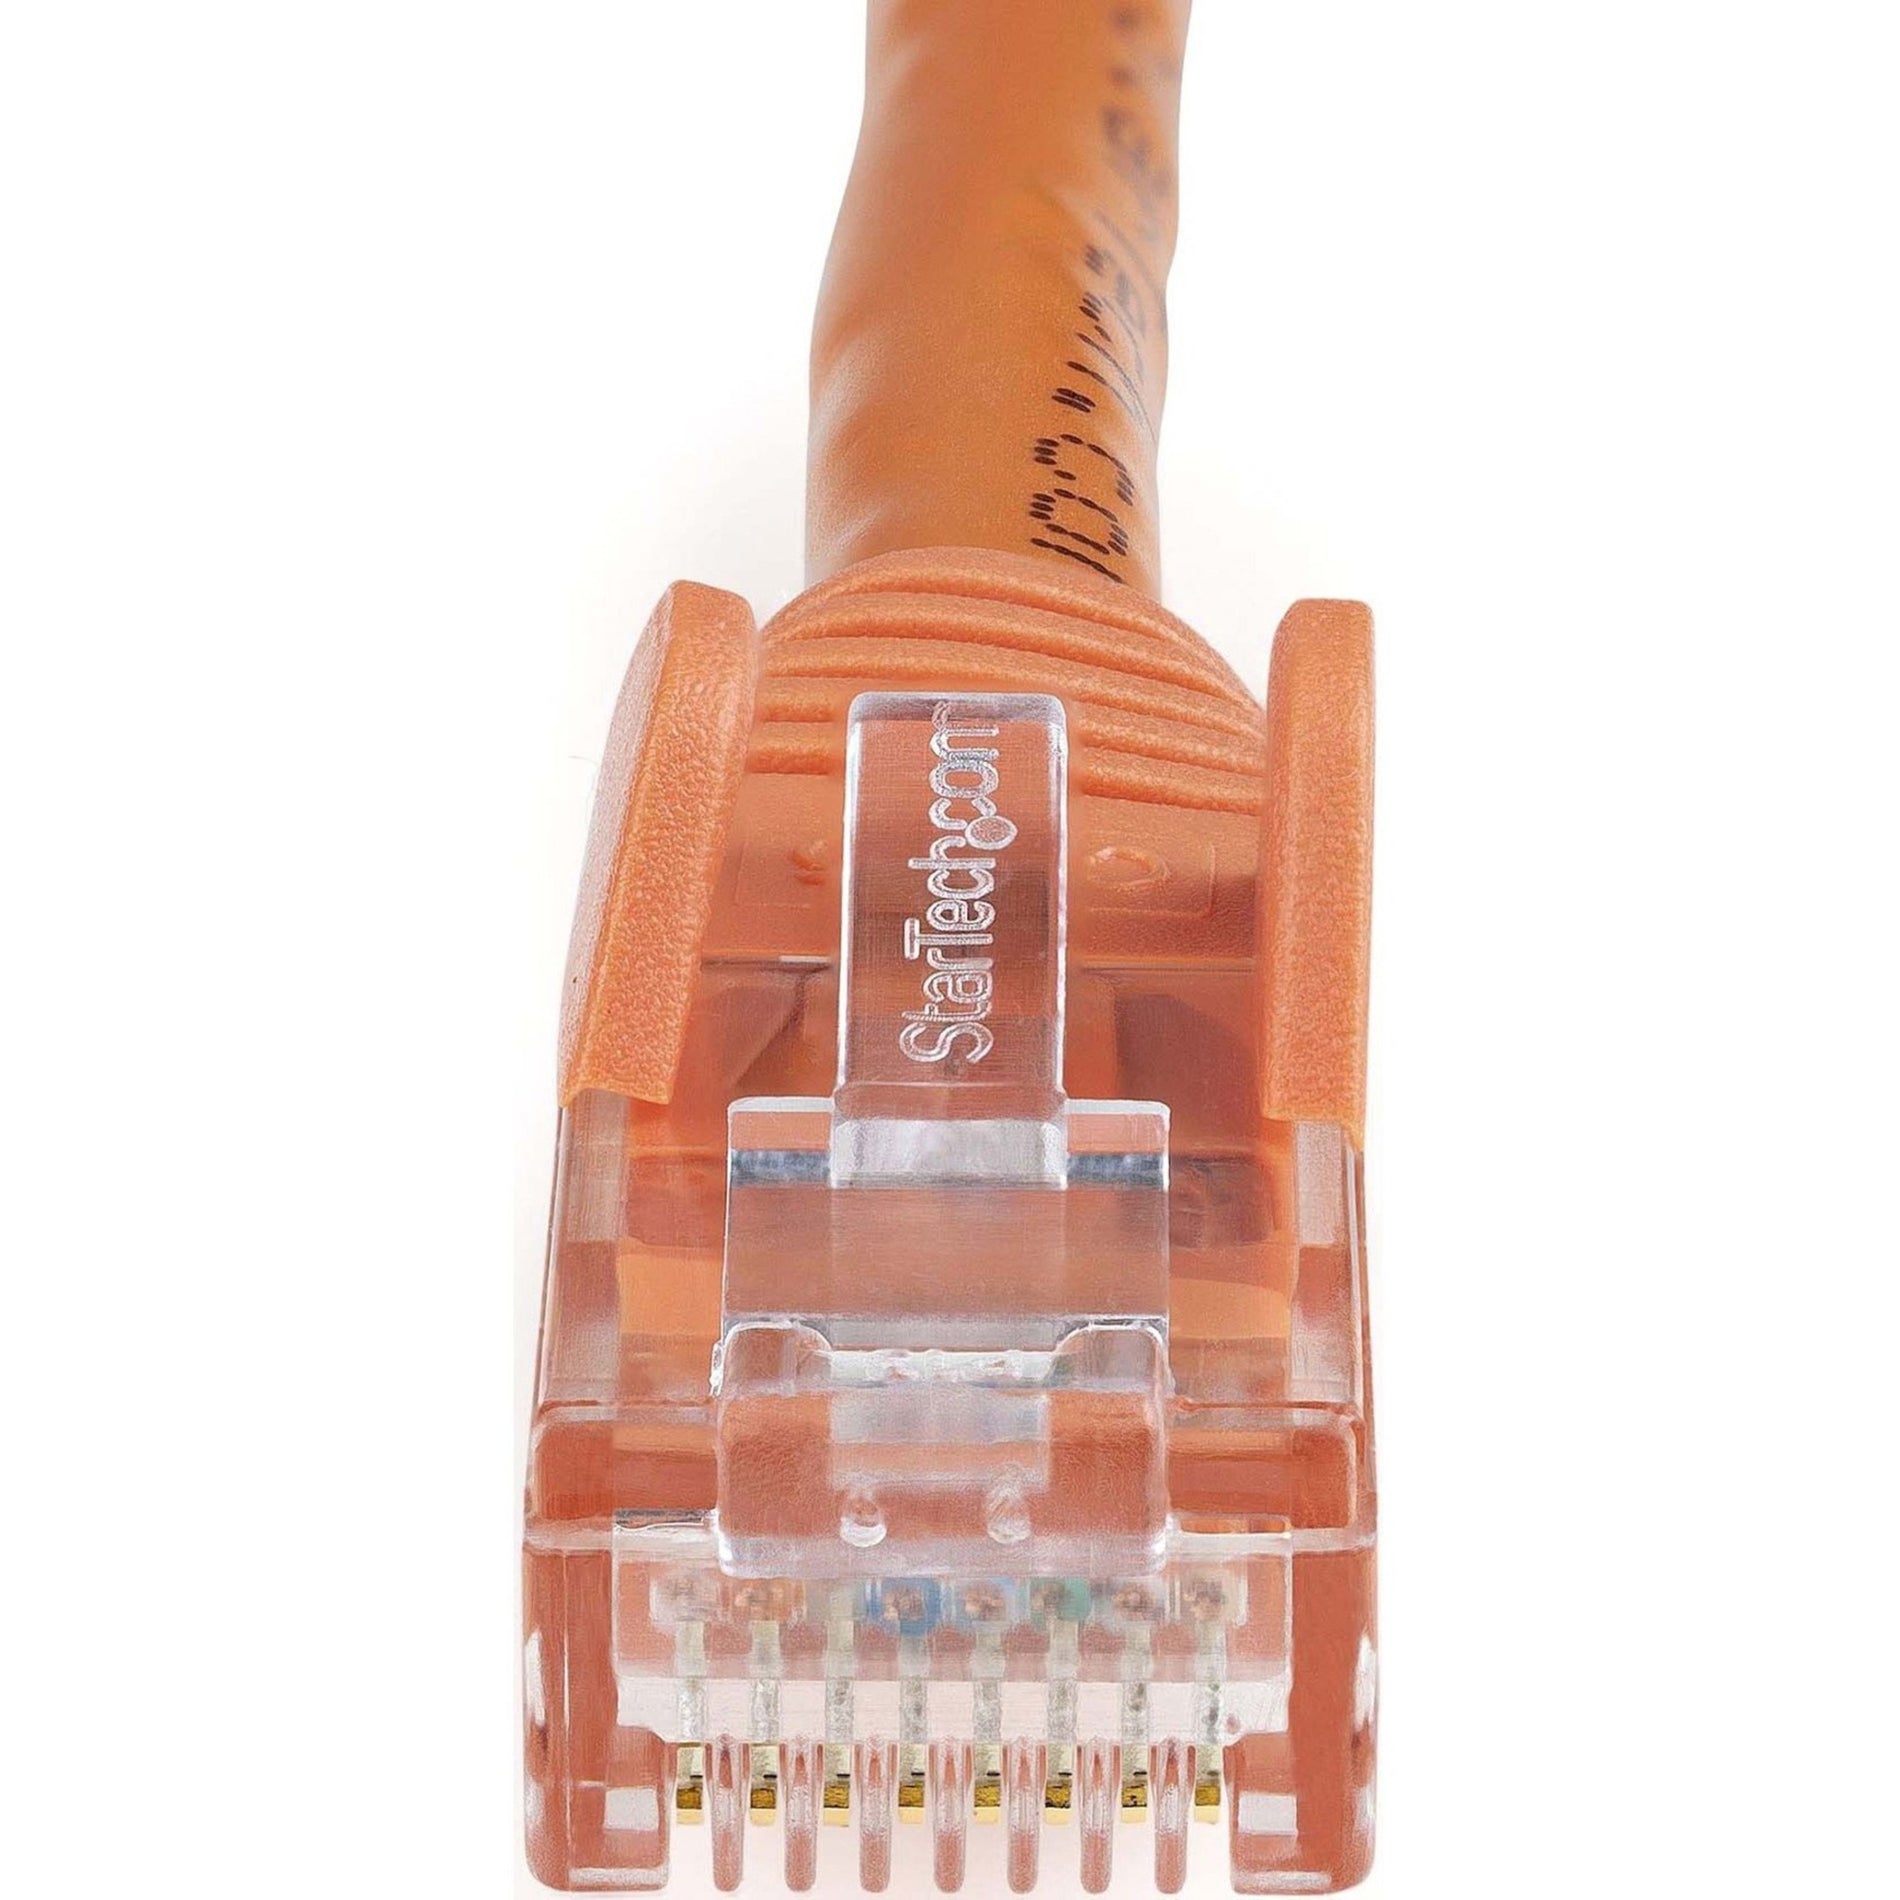 StarTech.com N6PATCH8OR Cat6 UTP Patch Network Cable, 8 ft Orange Ethernet Cable